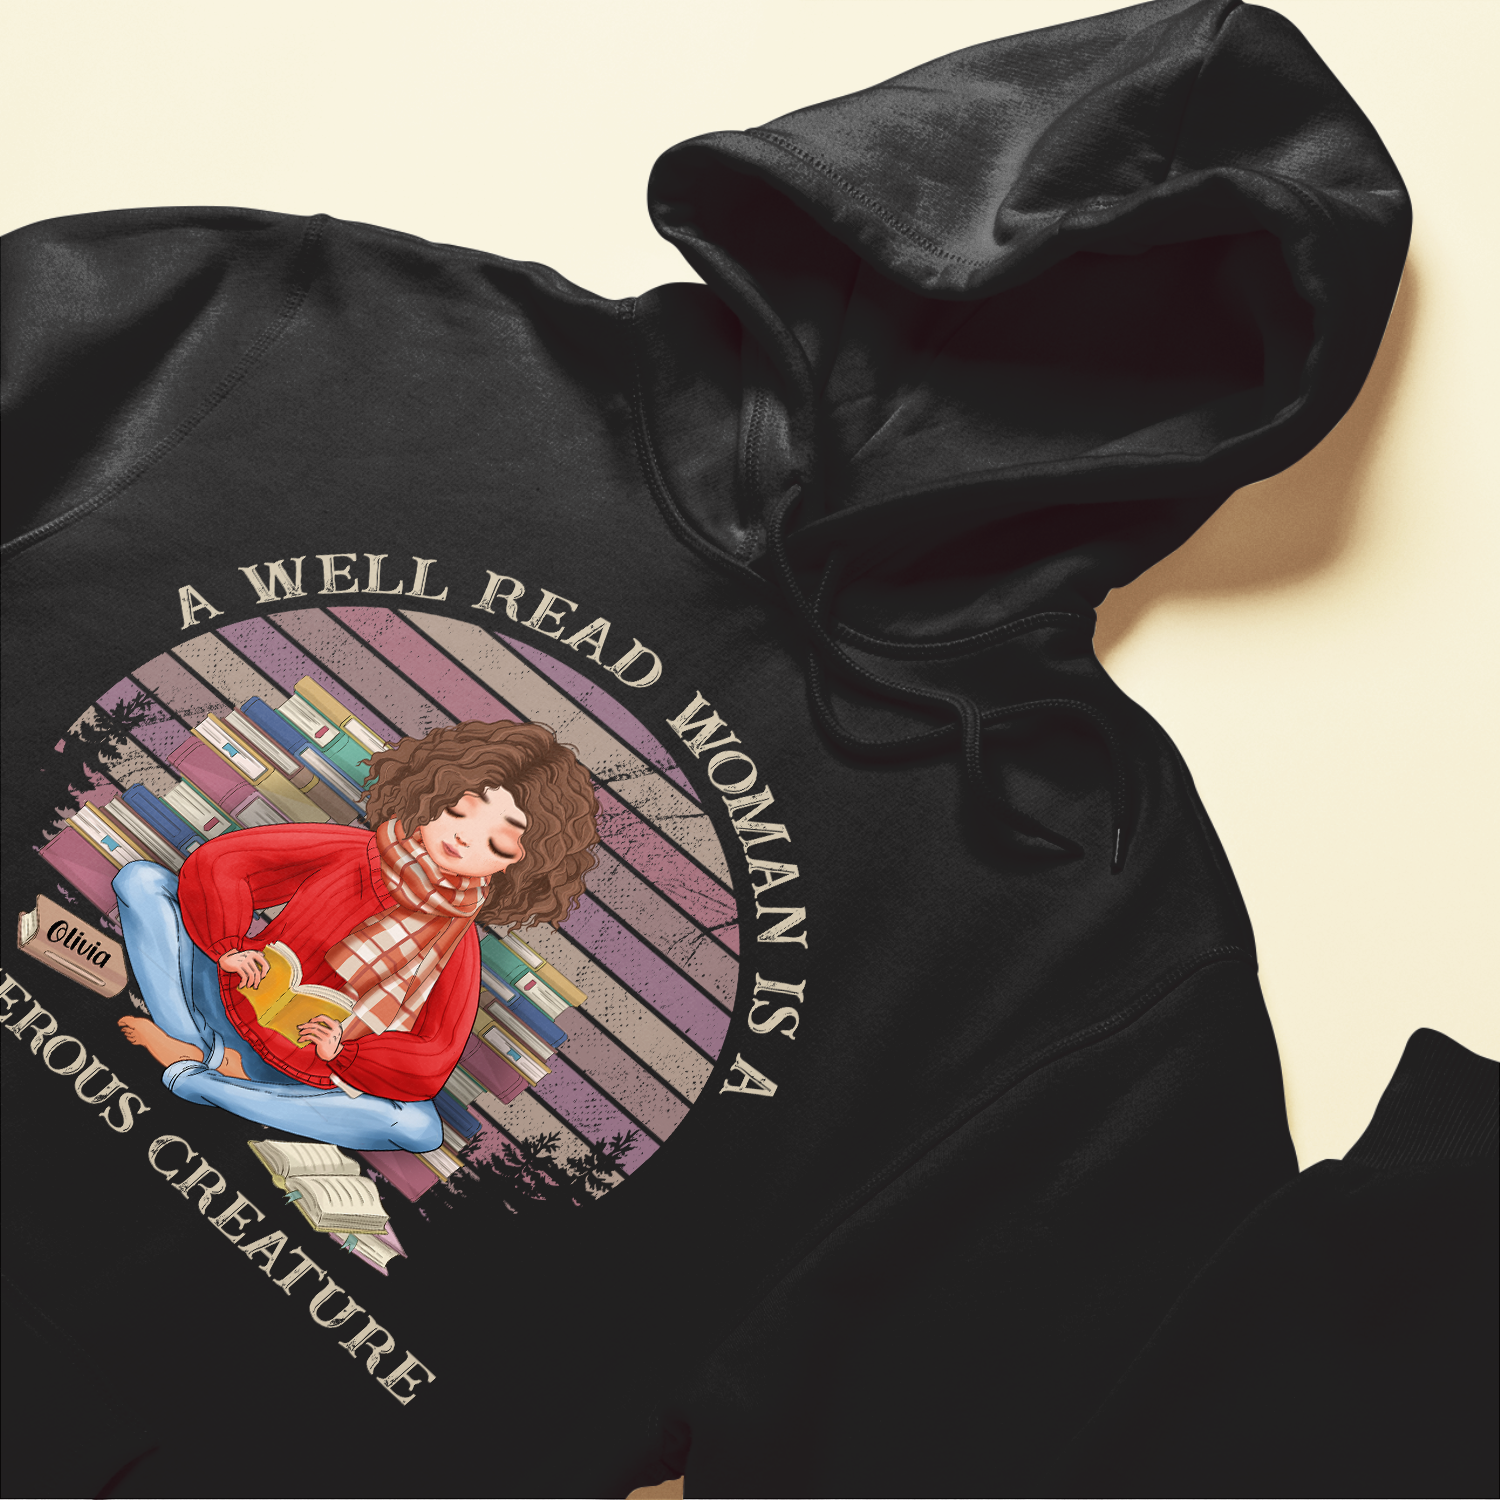 Well Read Woman Is A Dangerous Creature - Personalized Shirt - Gift For Book Lovers